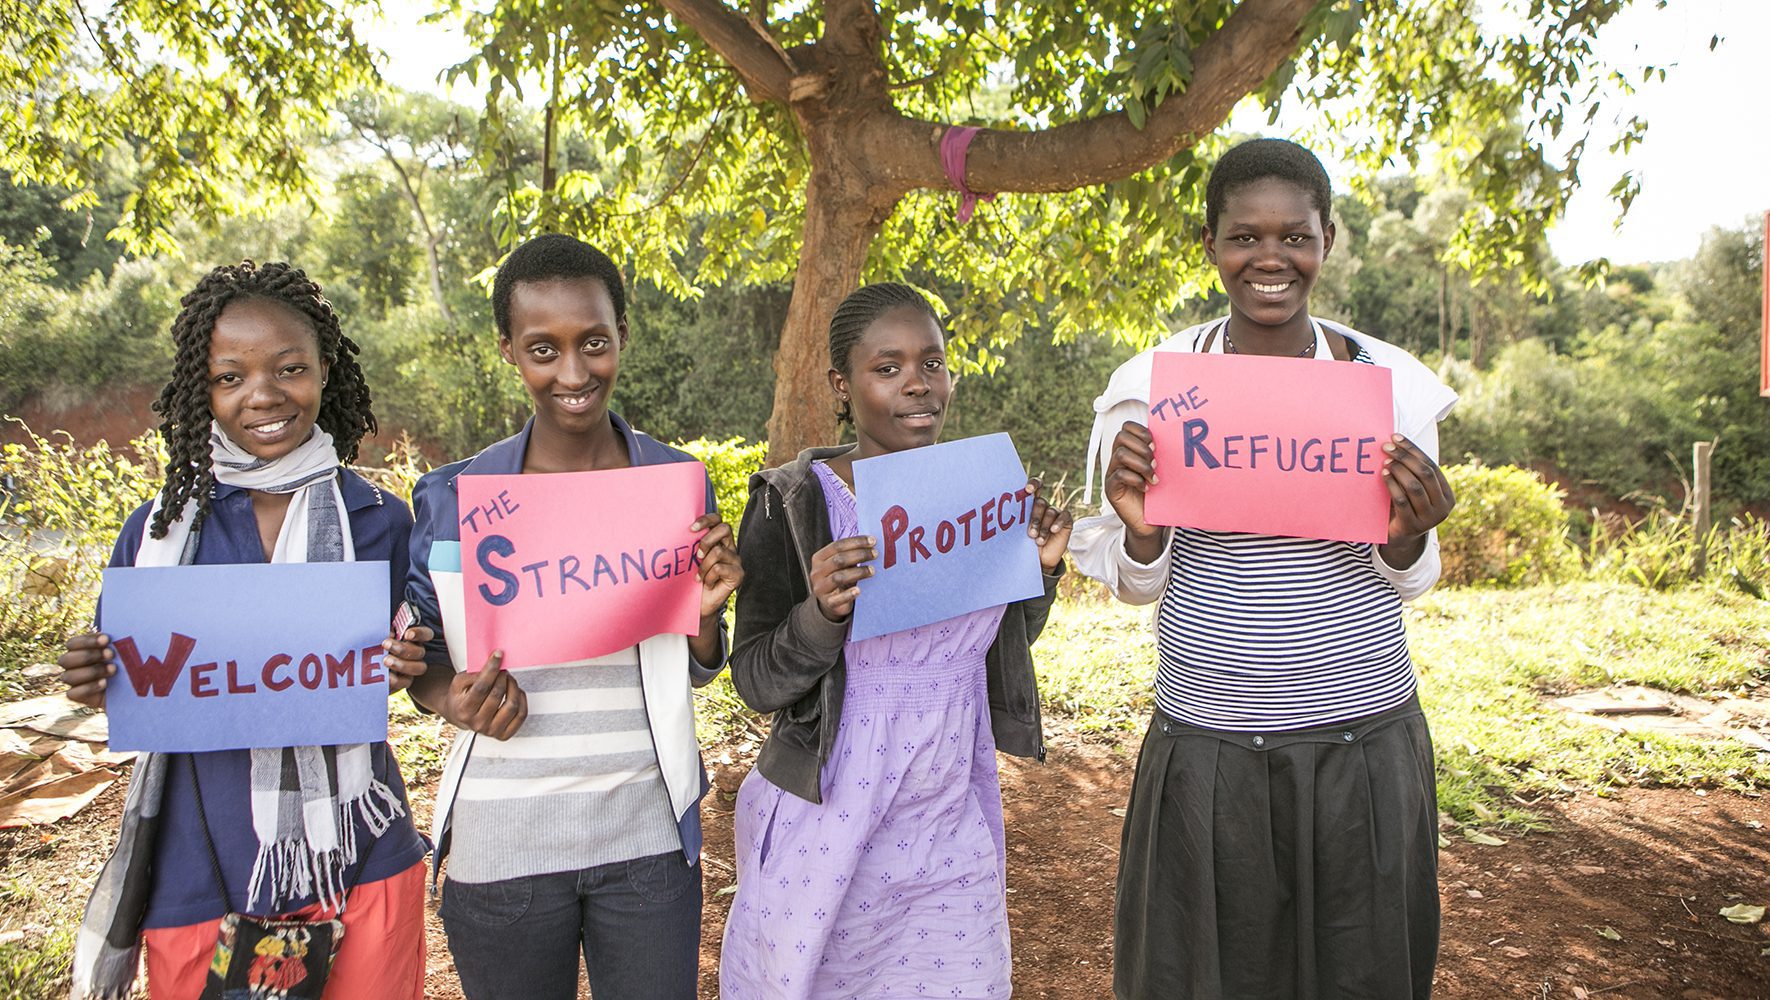 Refugees in foster care and other vulnerable youth carry signs about welcoming the stranger and protecting the refugee during a quarterly play day organized by HIAS staff in Nairobi, Kenya on November 22, 2013. | Congregational Values | Join the HIAS Welcome Campaign | HIAS